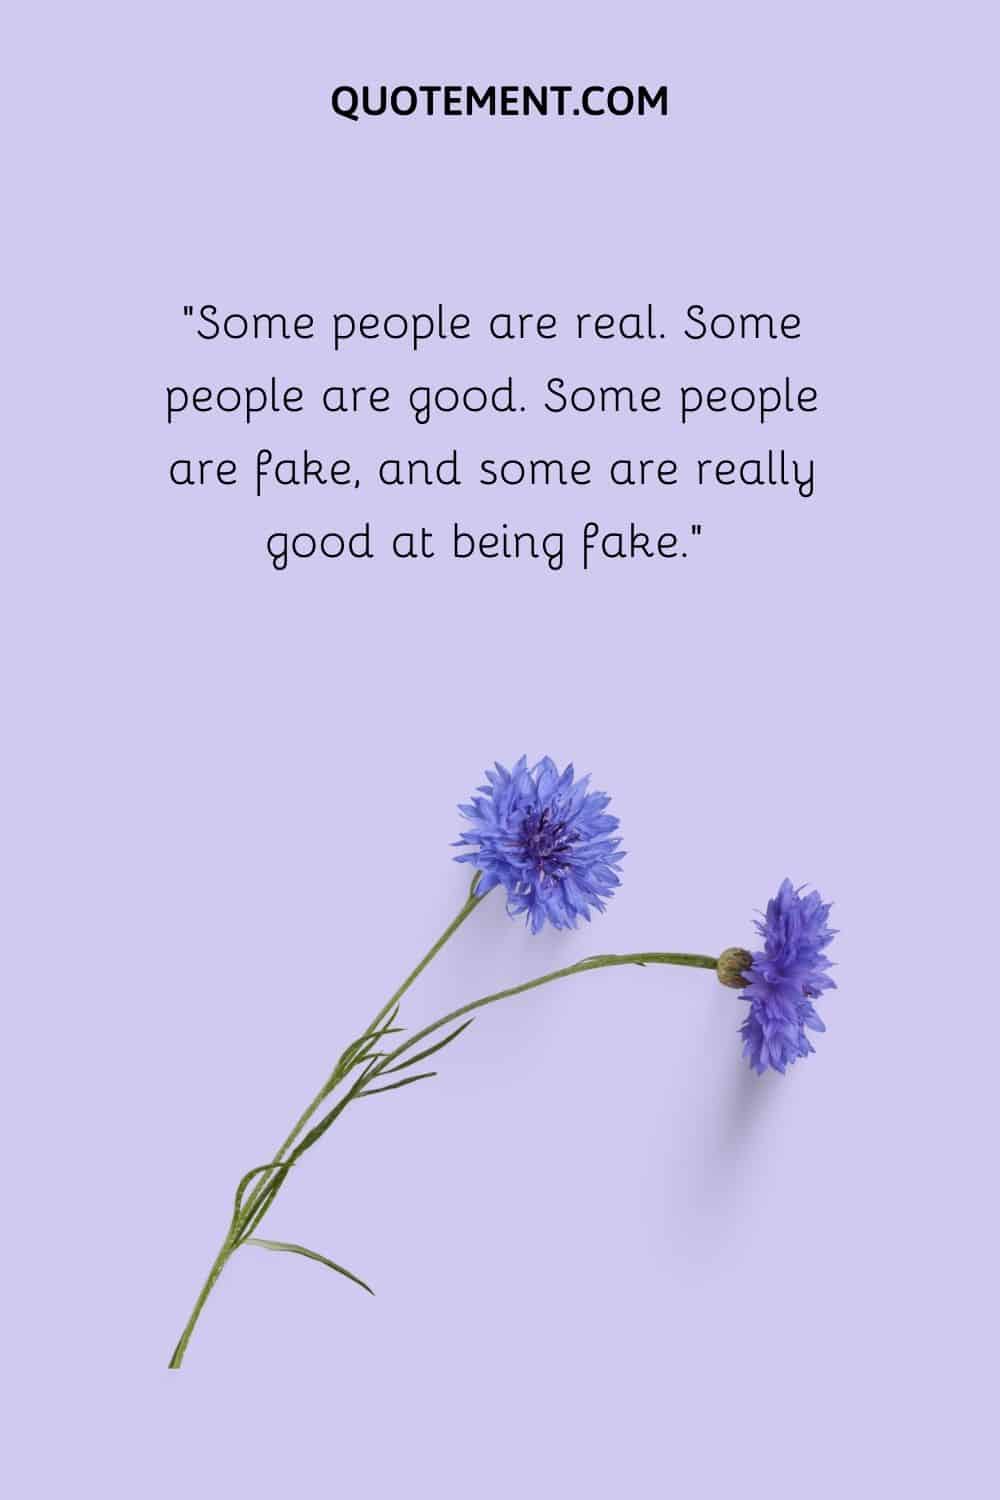 Some people are real